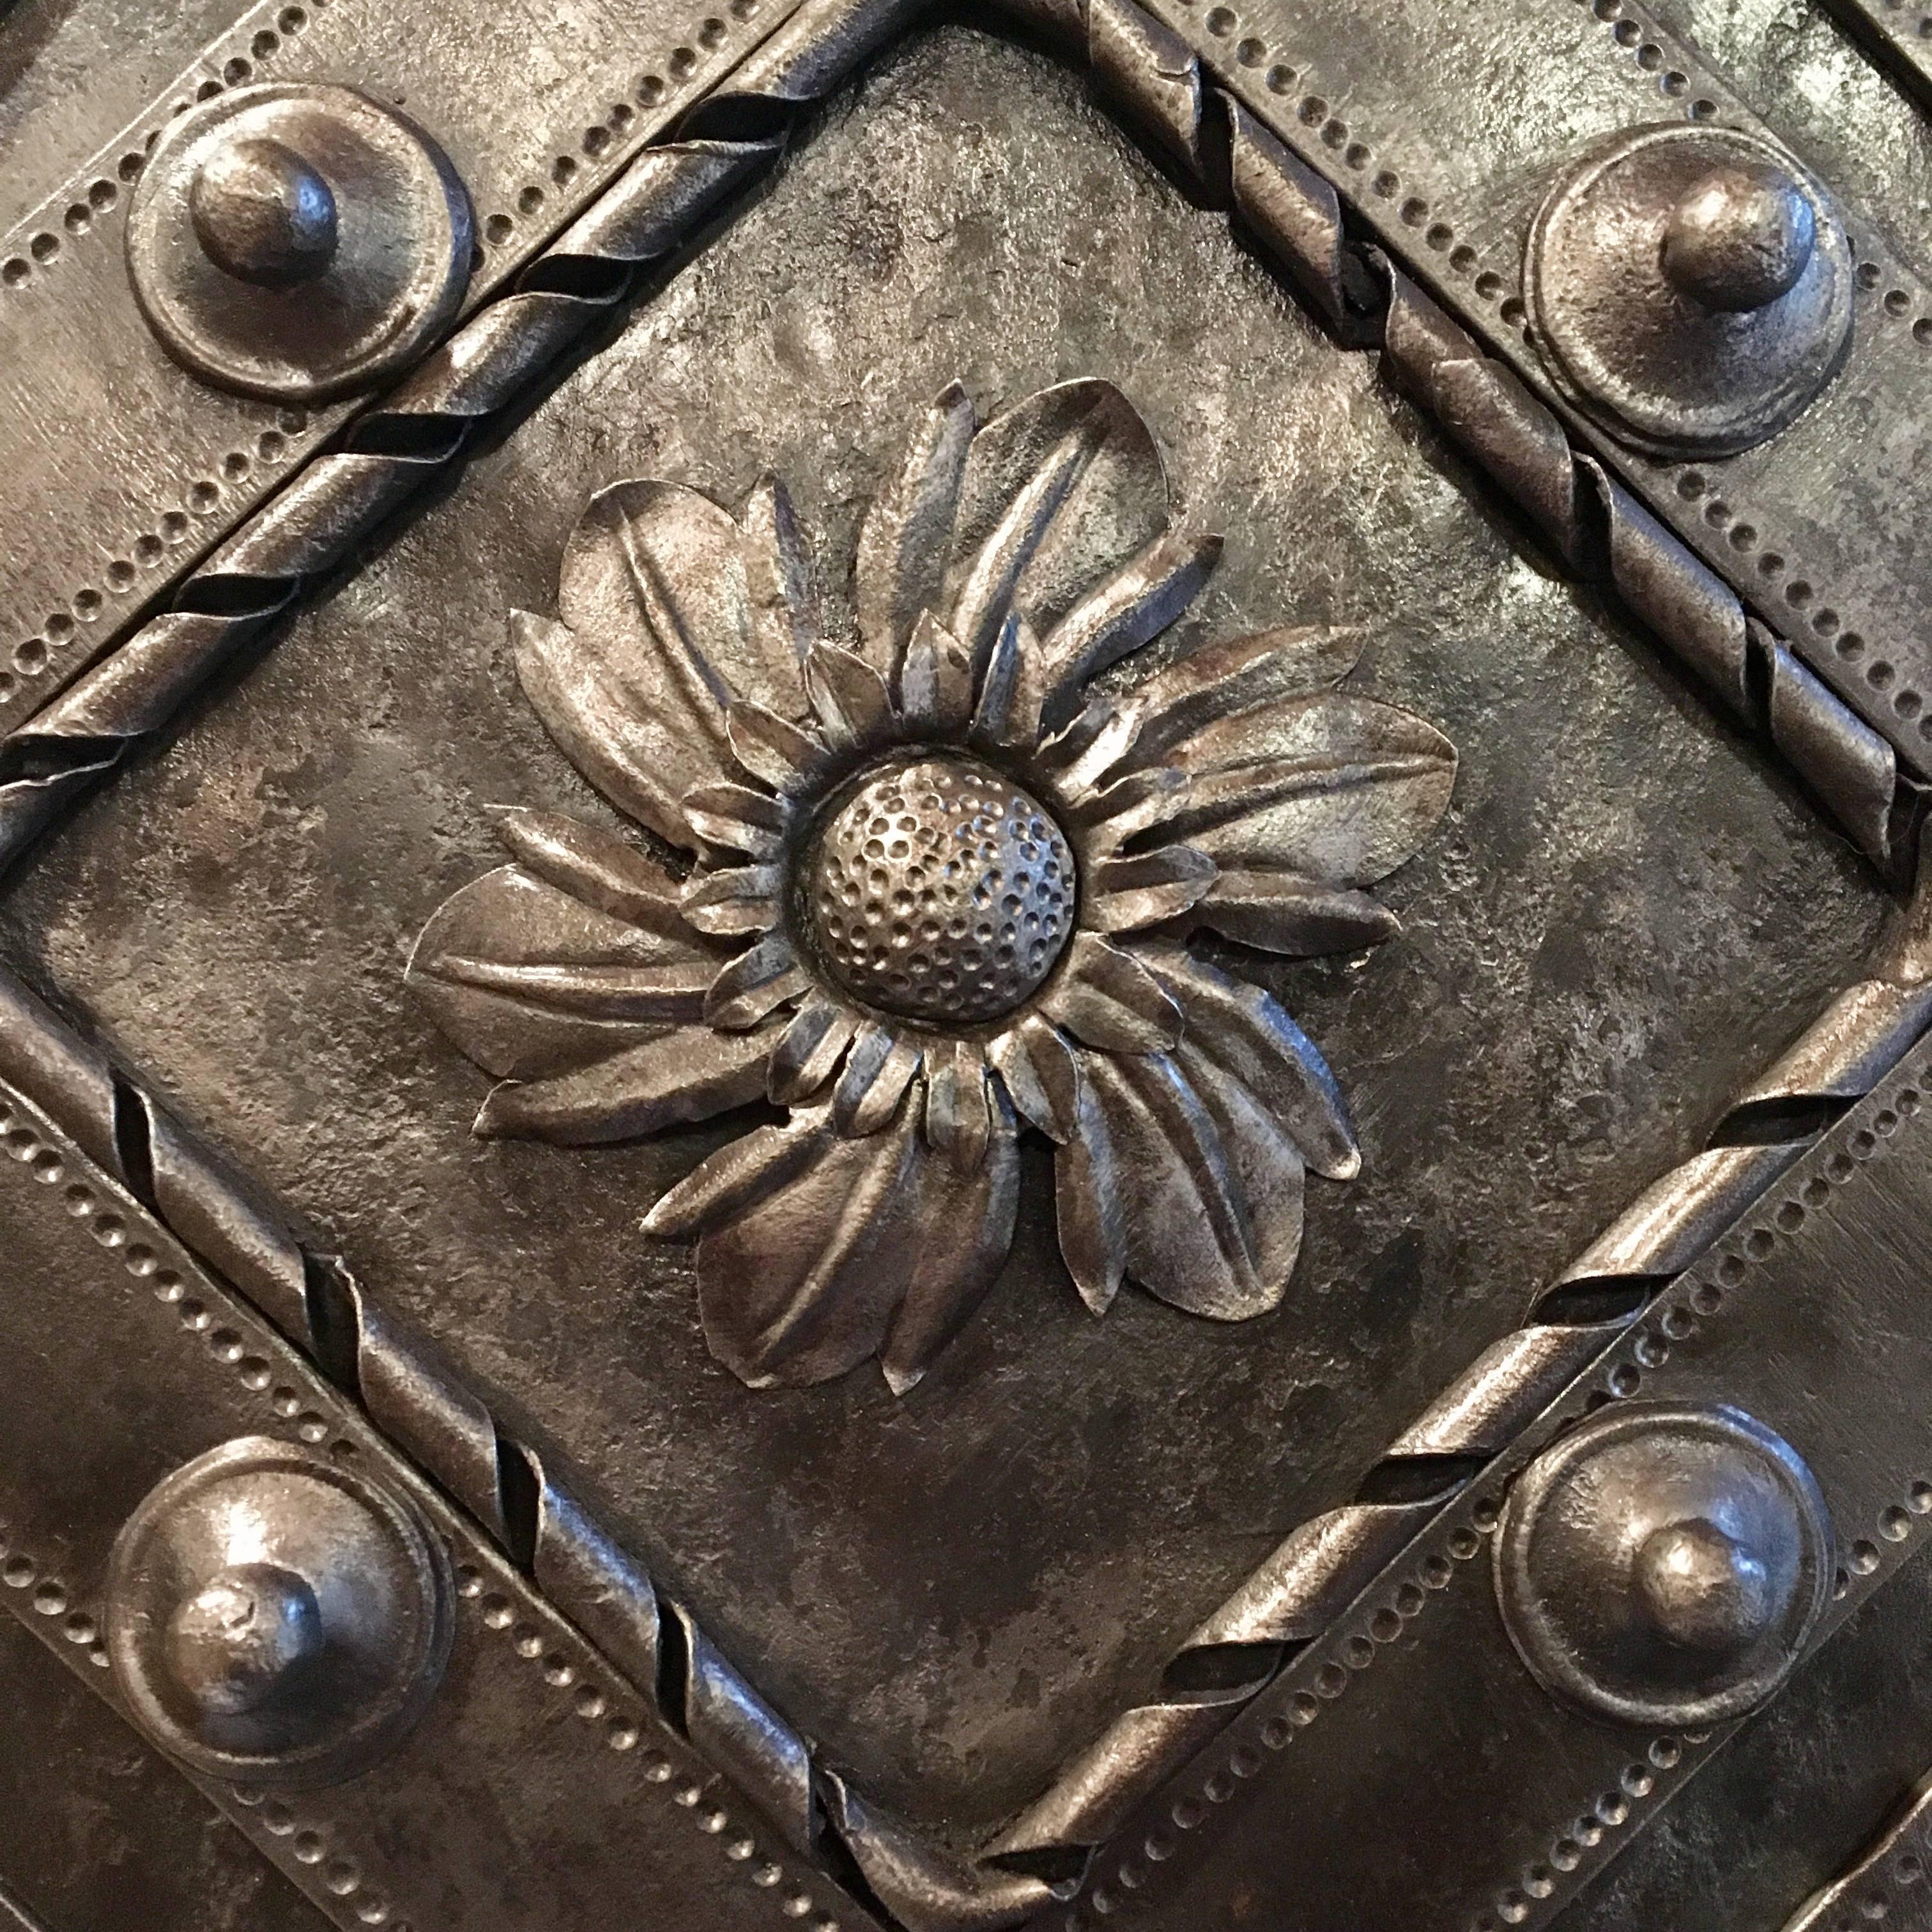 Northern Italian, specifically from the Piedmont region area, medium size hobnail safe, dated circa 1790-1830. Every part of the safe shows detailed and great decorations with a central flower that dominates the front door. 

The perfectly working